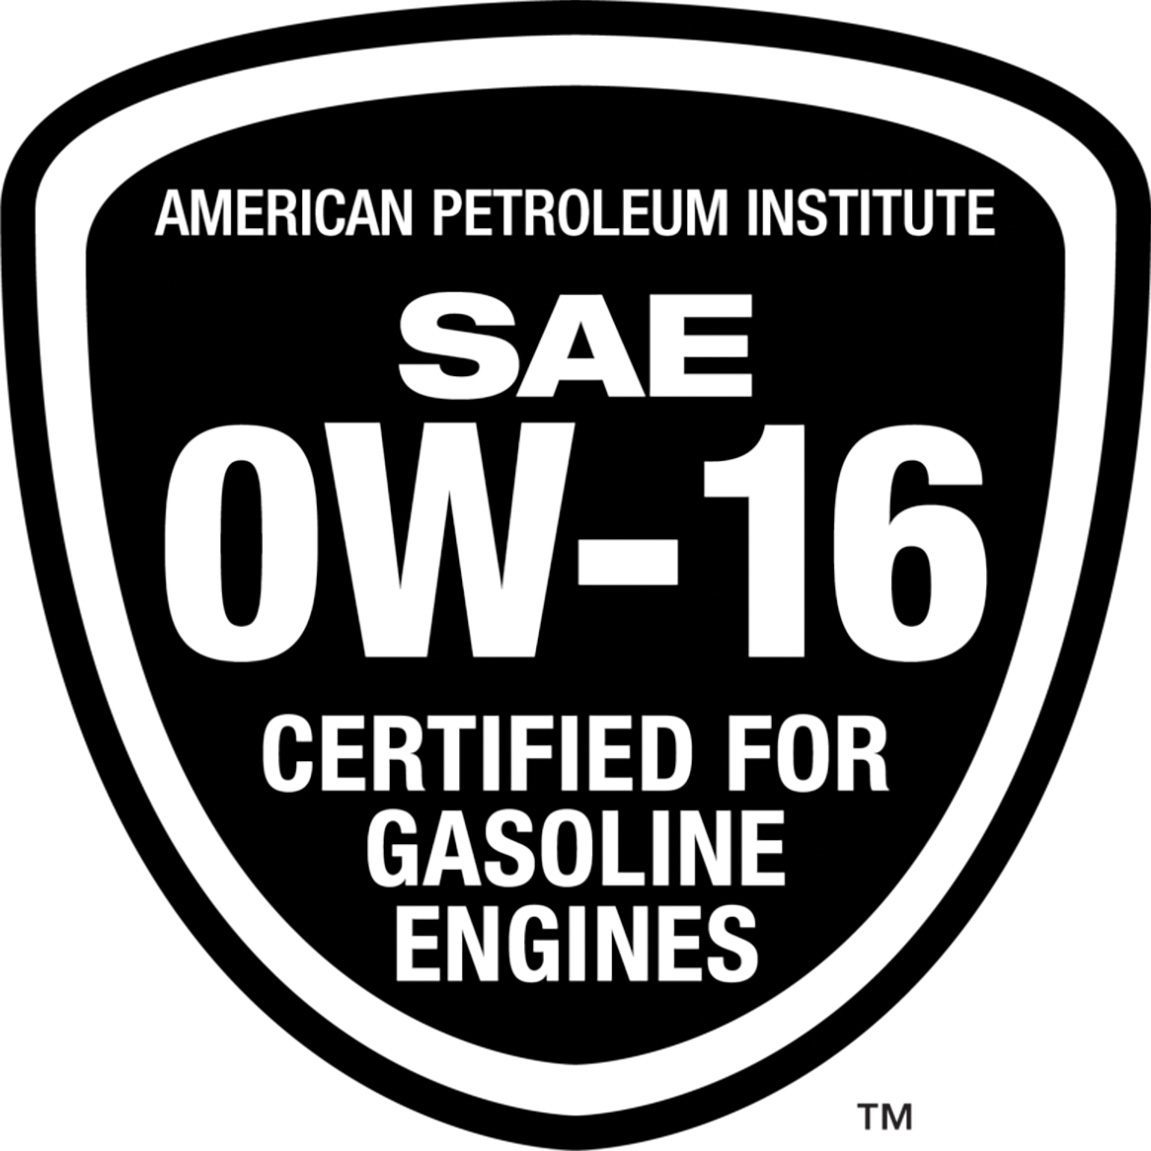 AMERICAN PETROLEUM INSTITUTE - SAE 0W-16 - CERTIFIED FOR GASOLINE ENGINES